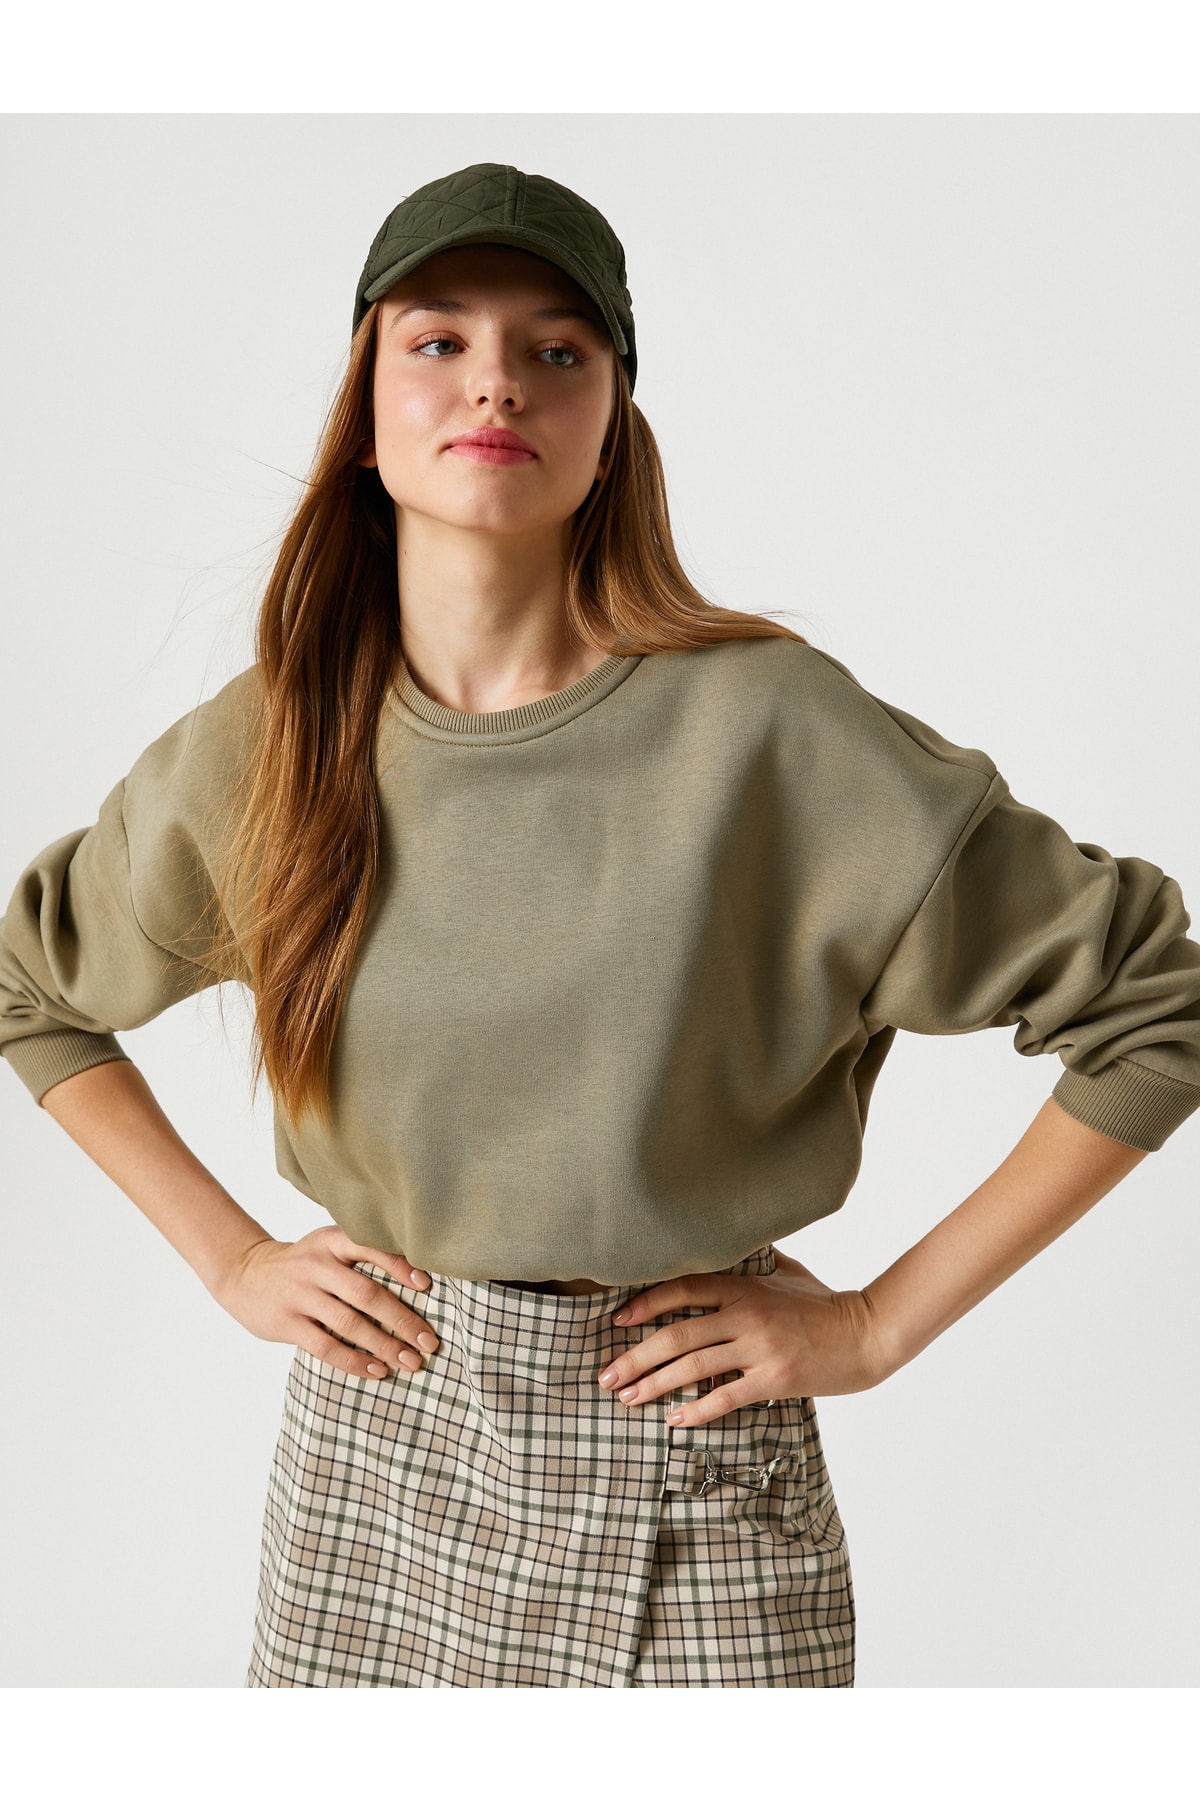 Koton A Crop Sweatshirt with a Crew Neck Long Sleeved, Comfortable Fit.